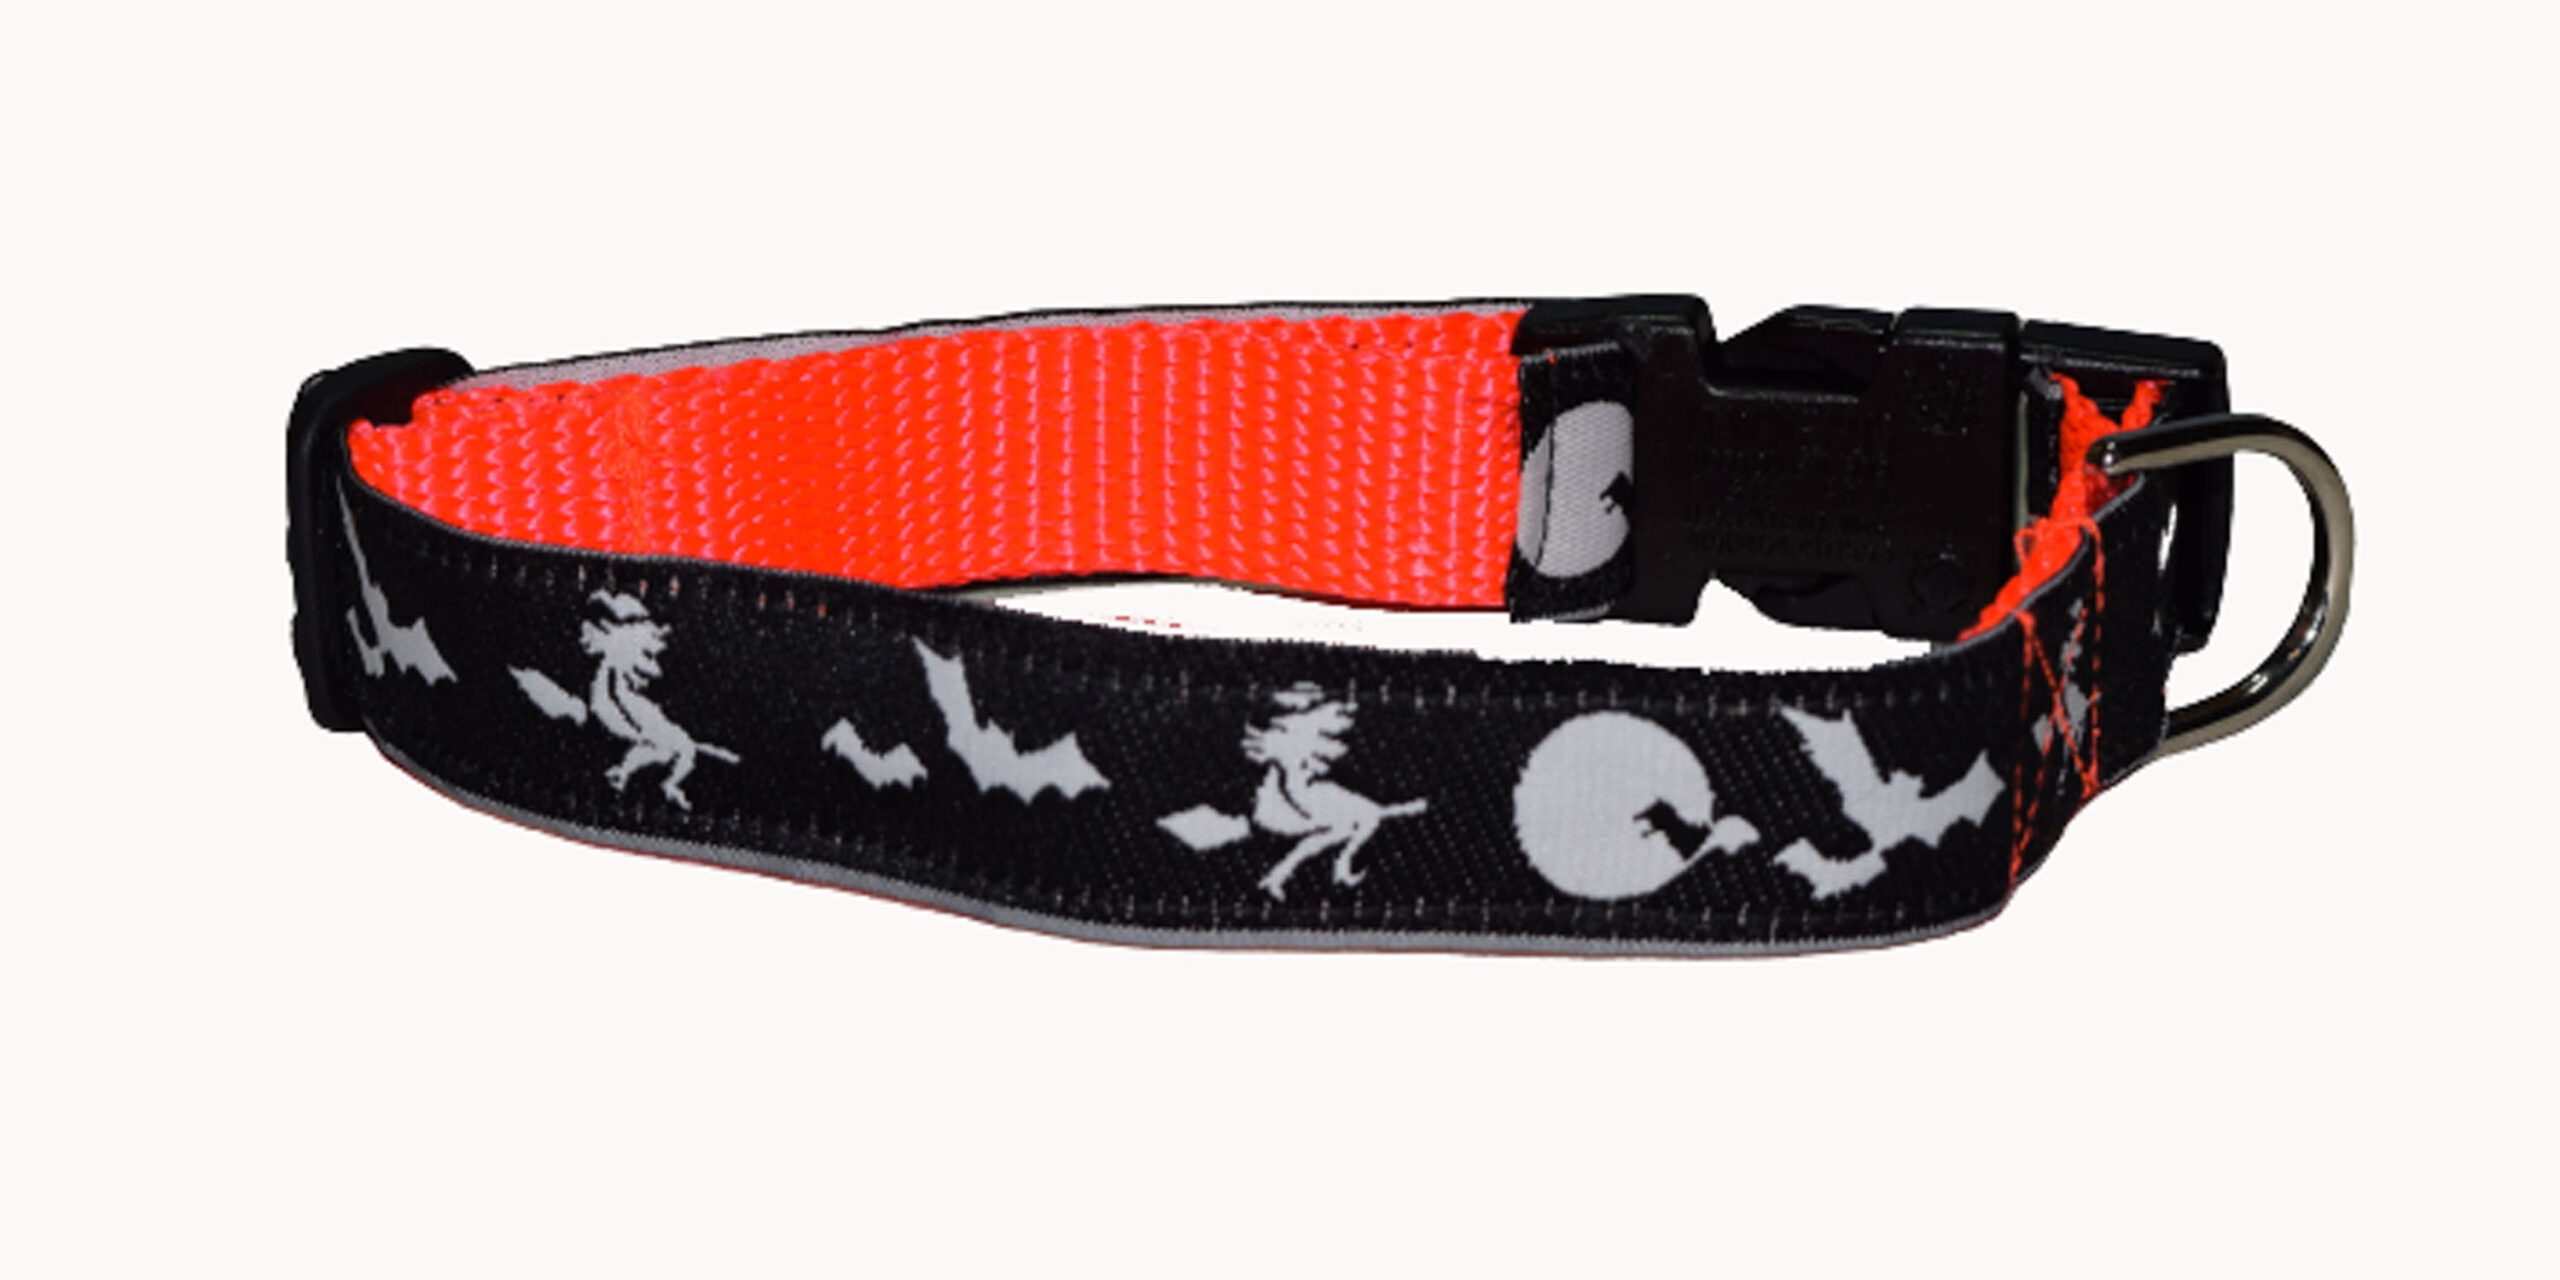 Bats and Witches Wholesale Dog Collar